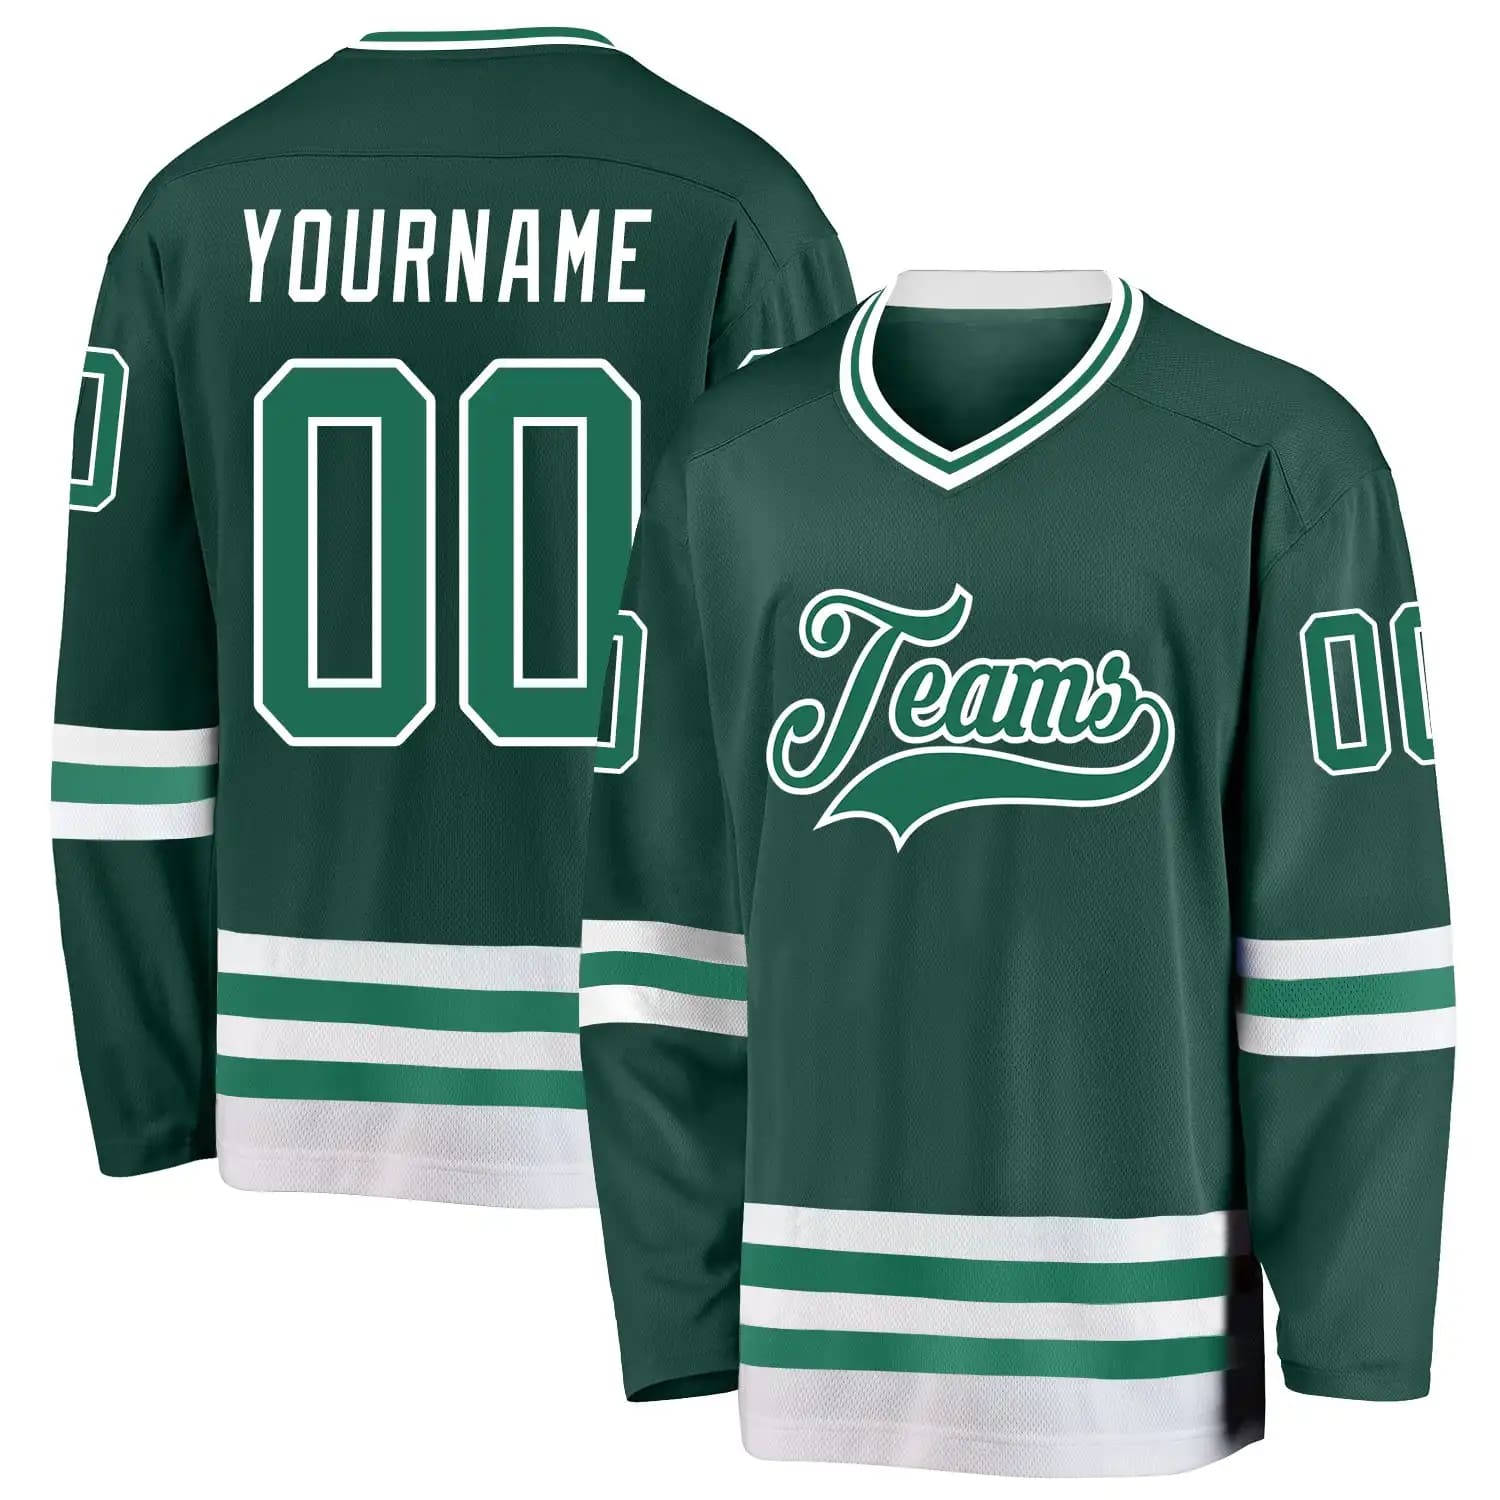 Stitched And Print Green Kelly Green-White Hockey Jersey Custom